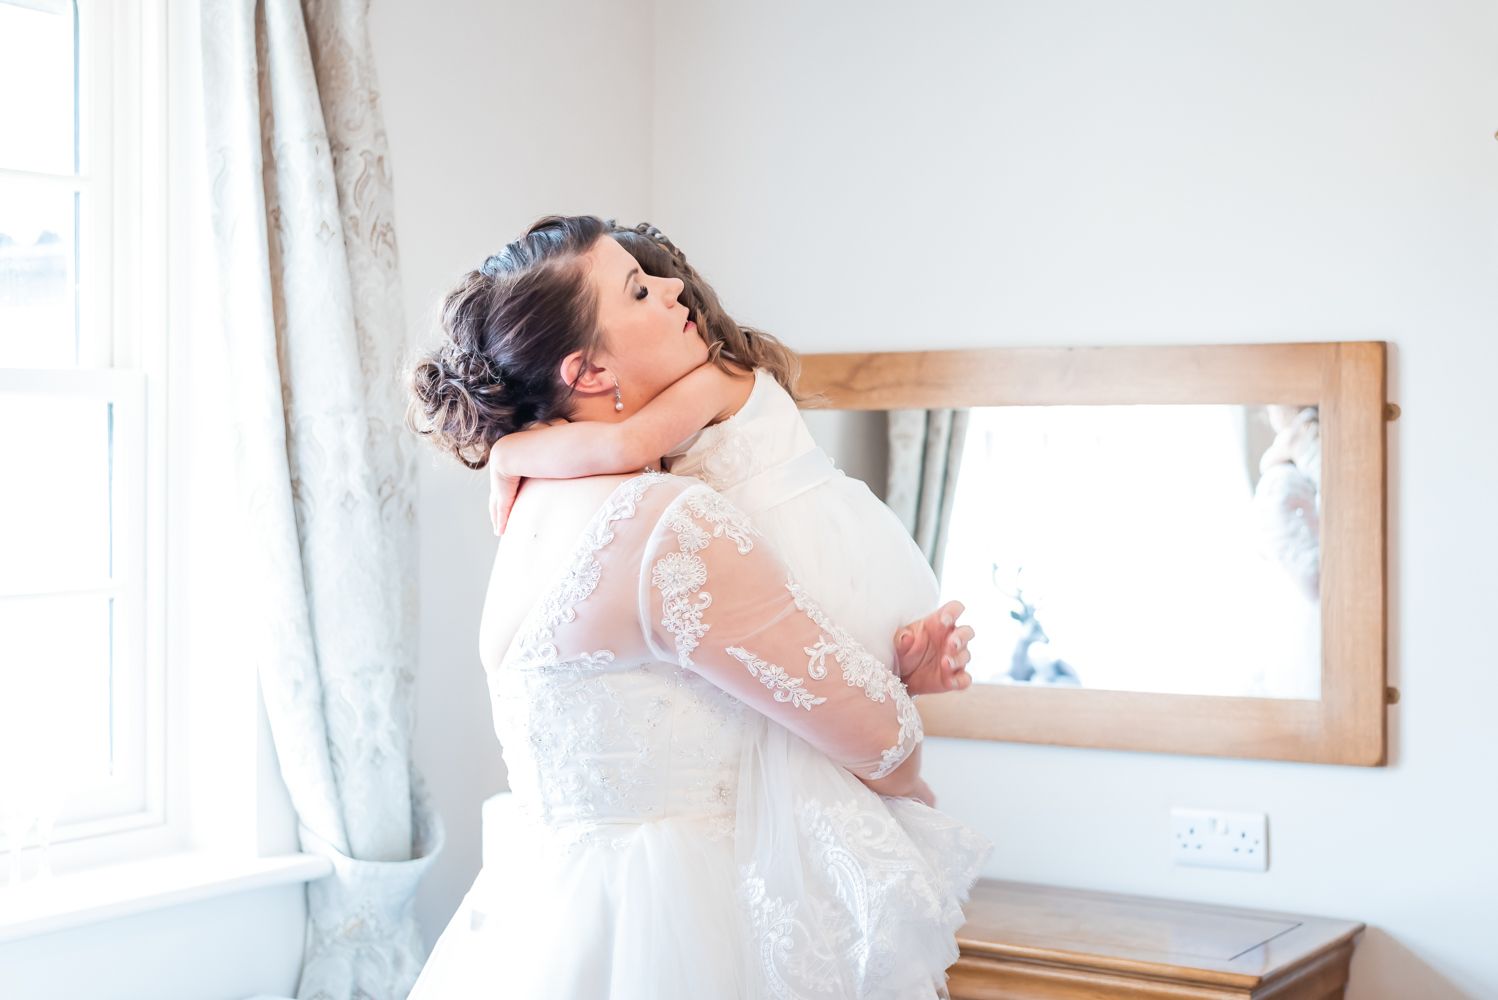 the bride hugs her daughter as they've both just finished getting ready on her wedding day.